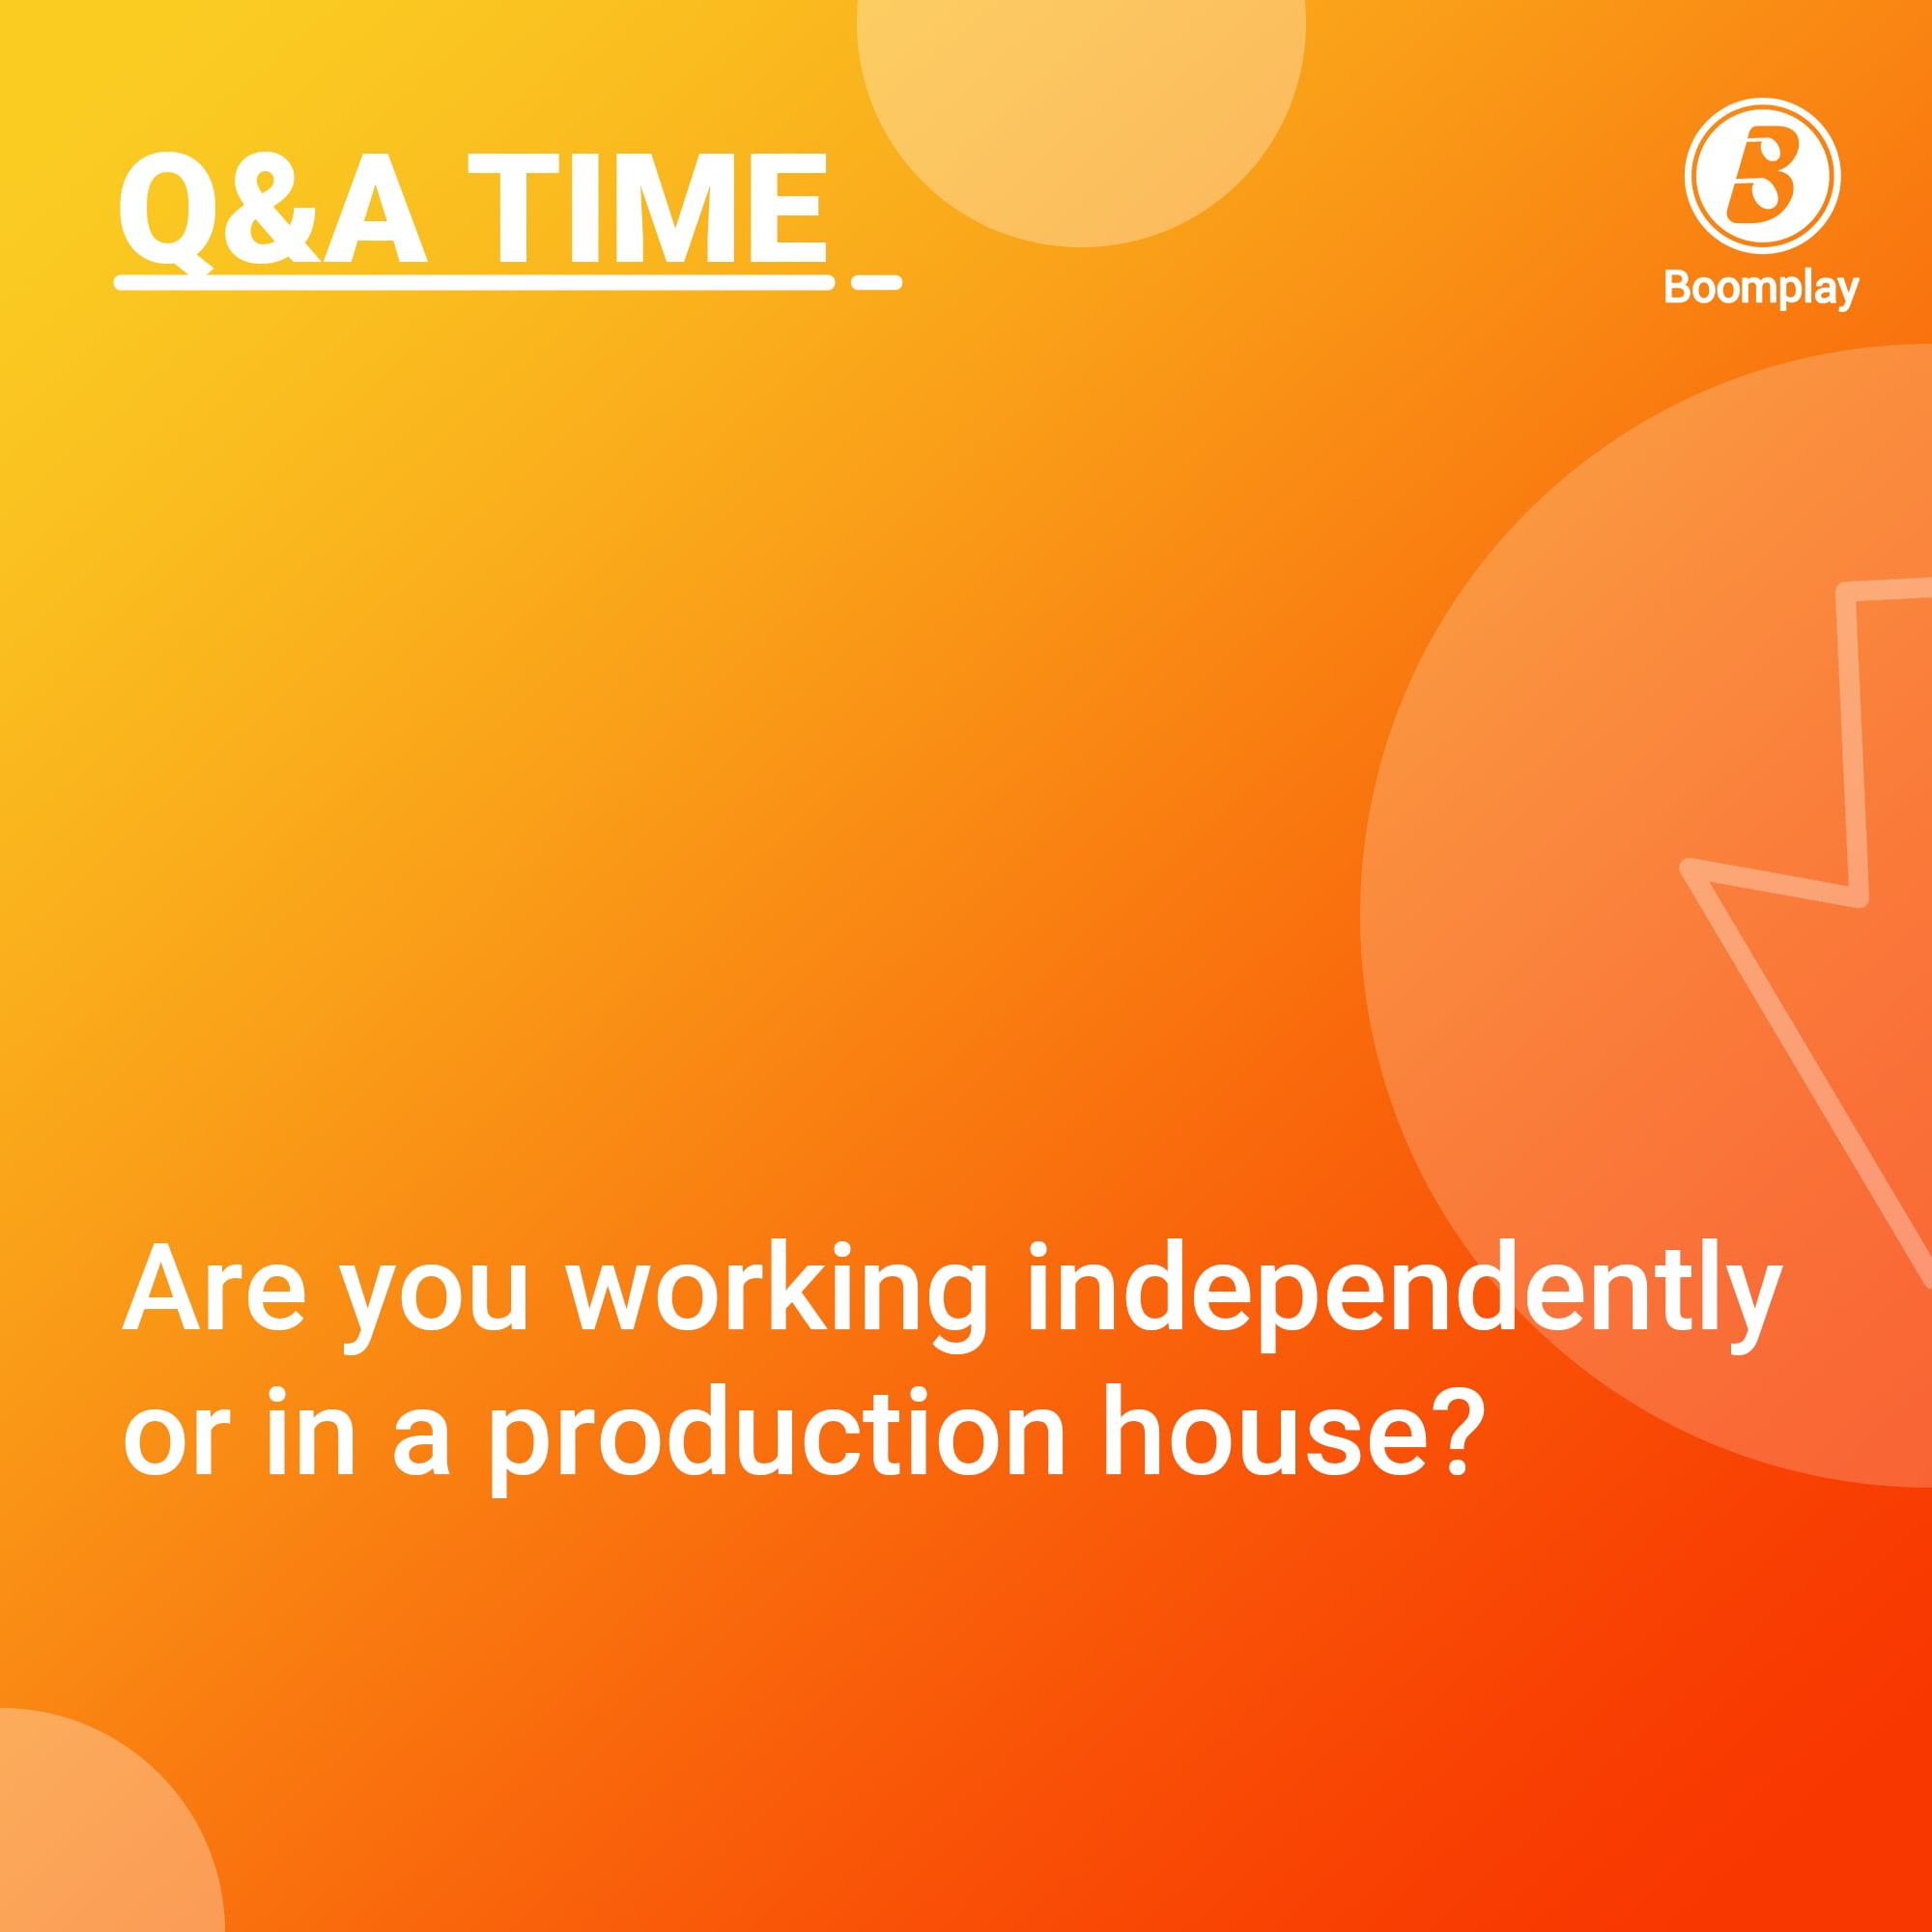 Q&A Time!  Are you working independently or in a production house?